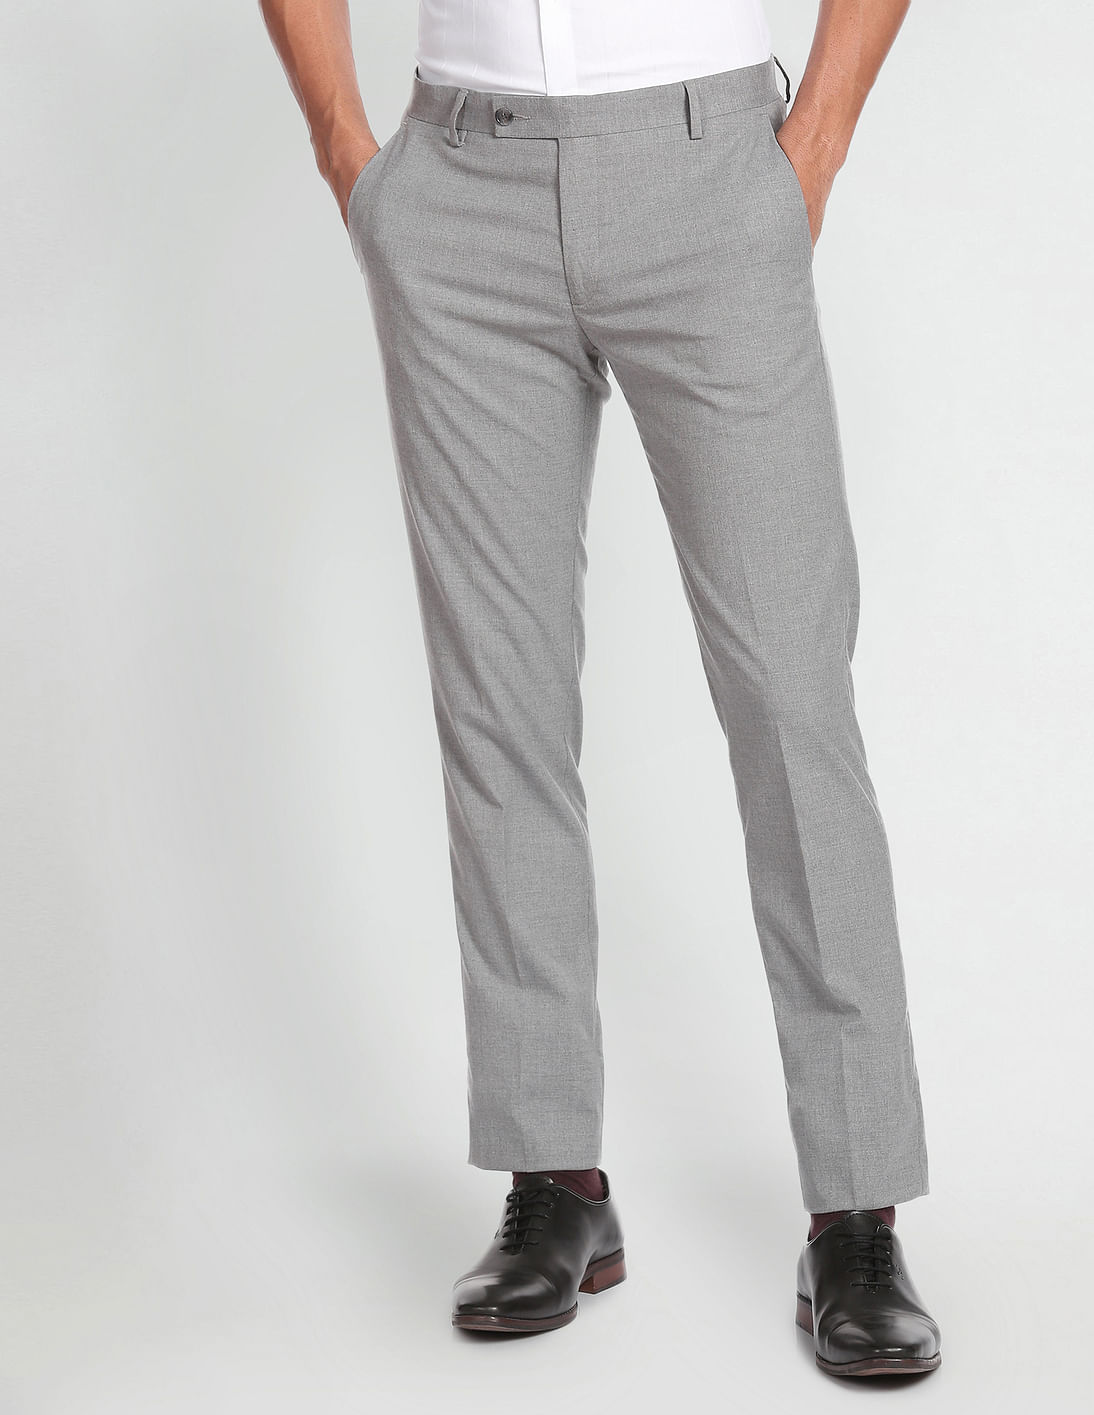 Formal Trouser Pant in Bangalore at best price by New Trends Fashion For  Mens - Justdial